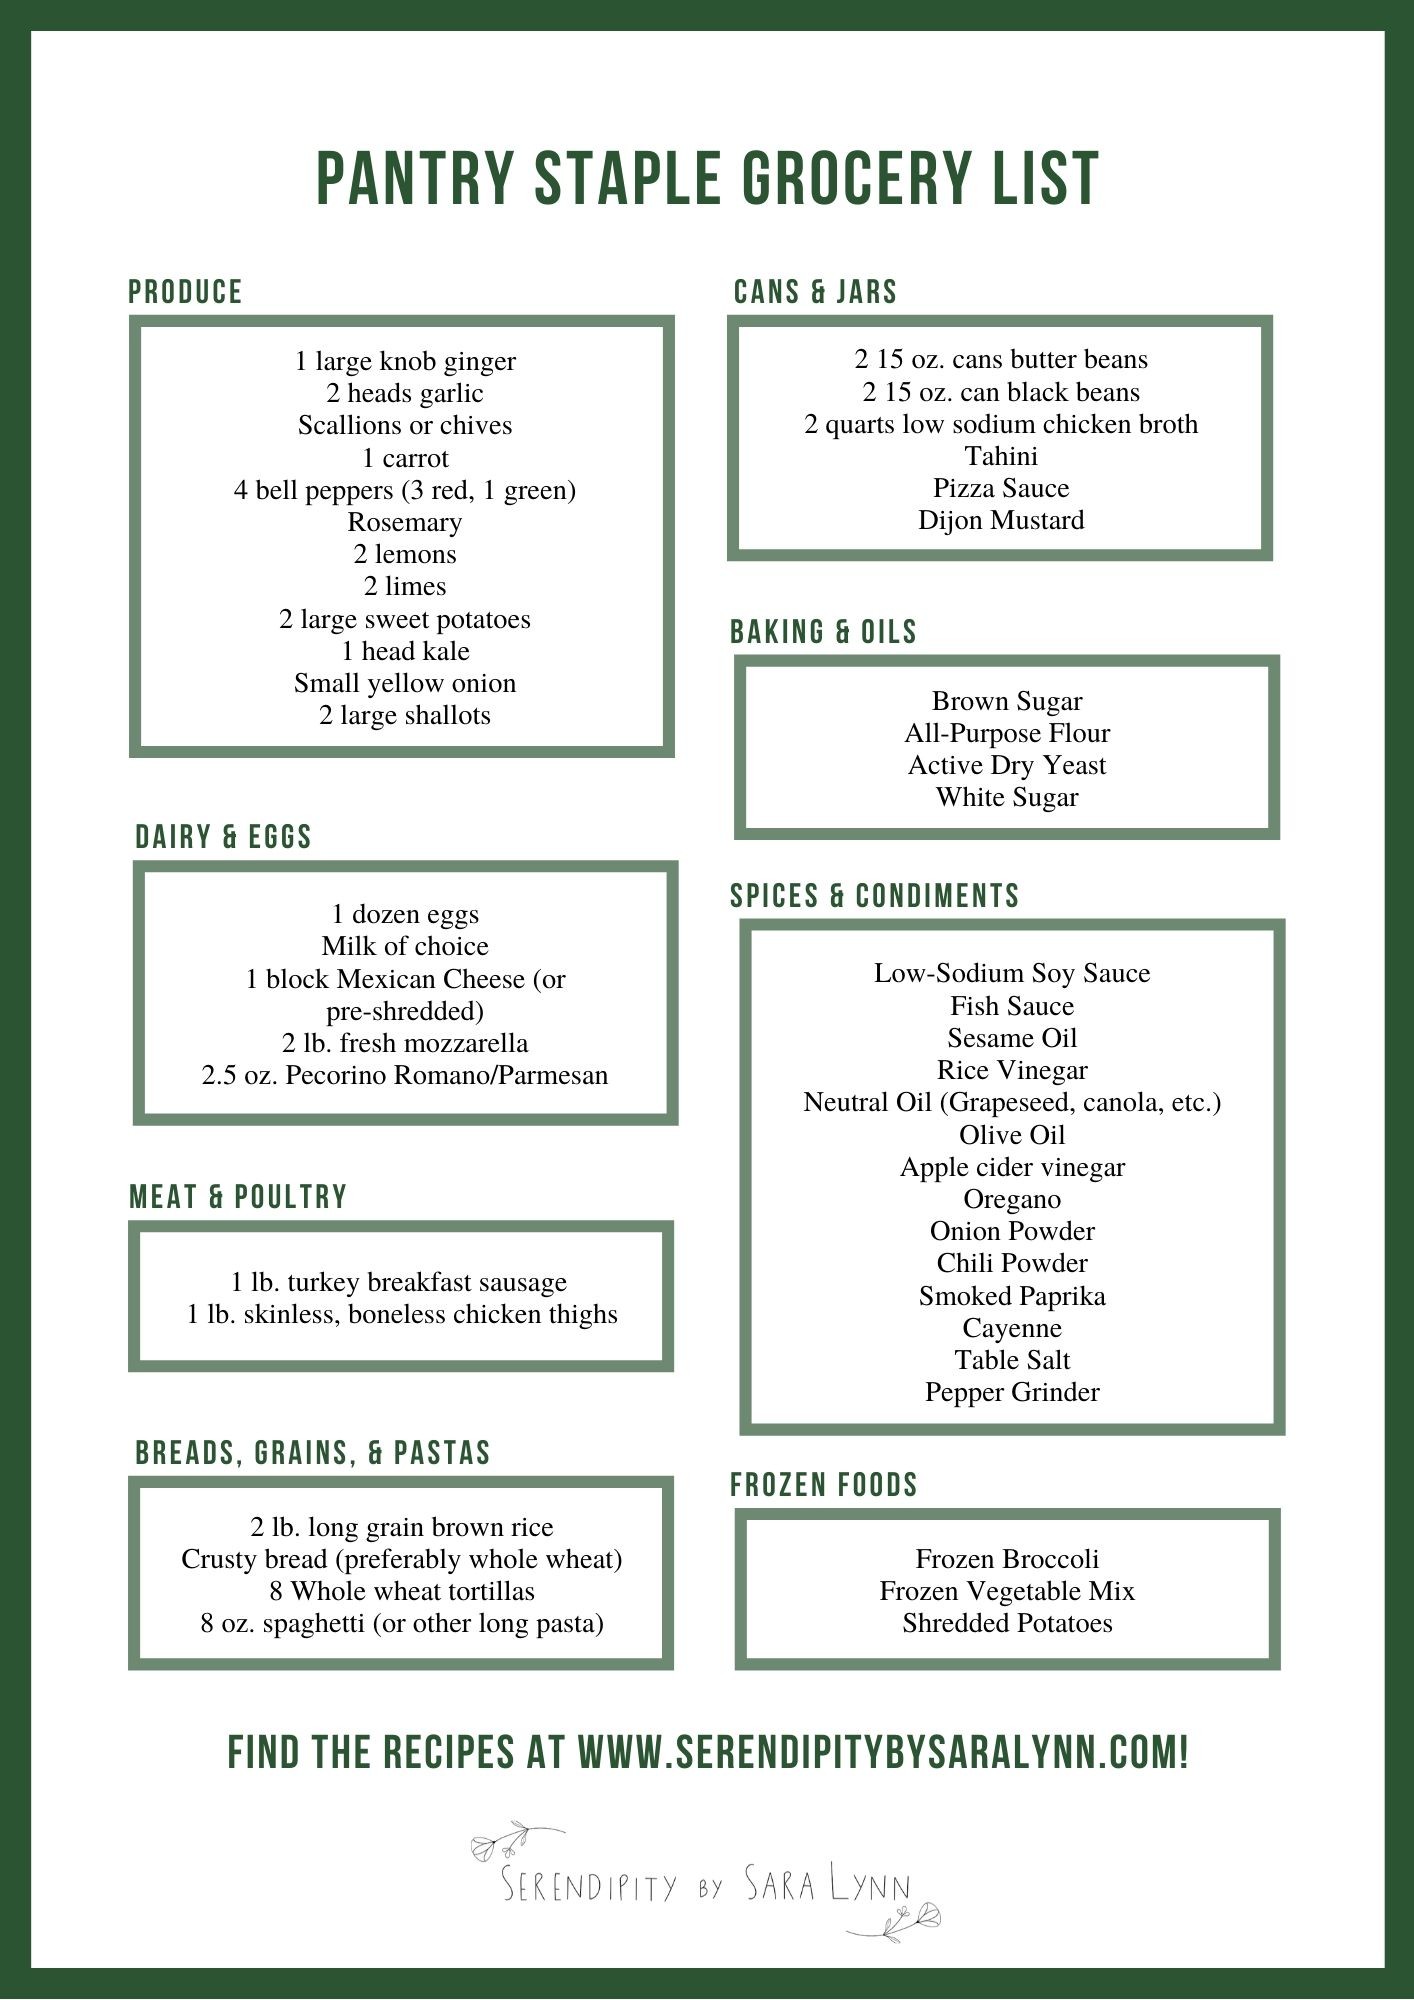 A white grocery list with pantry staple ingredients in dark green font.